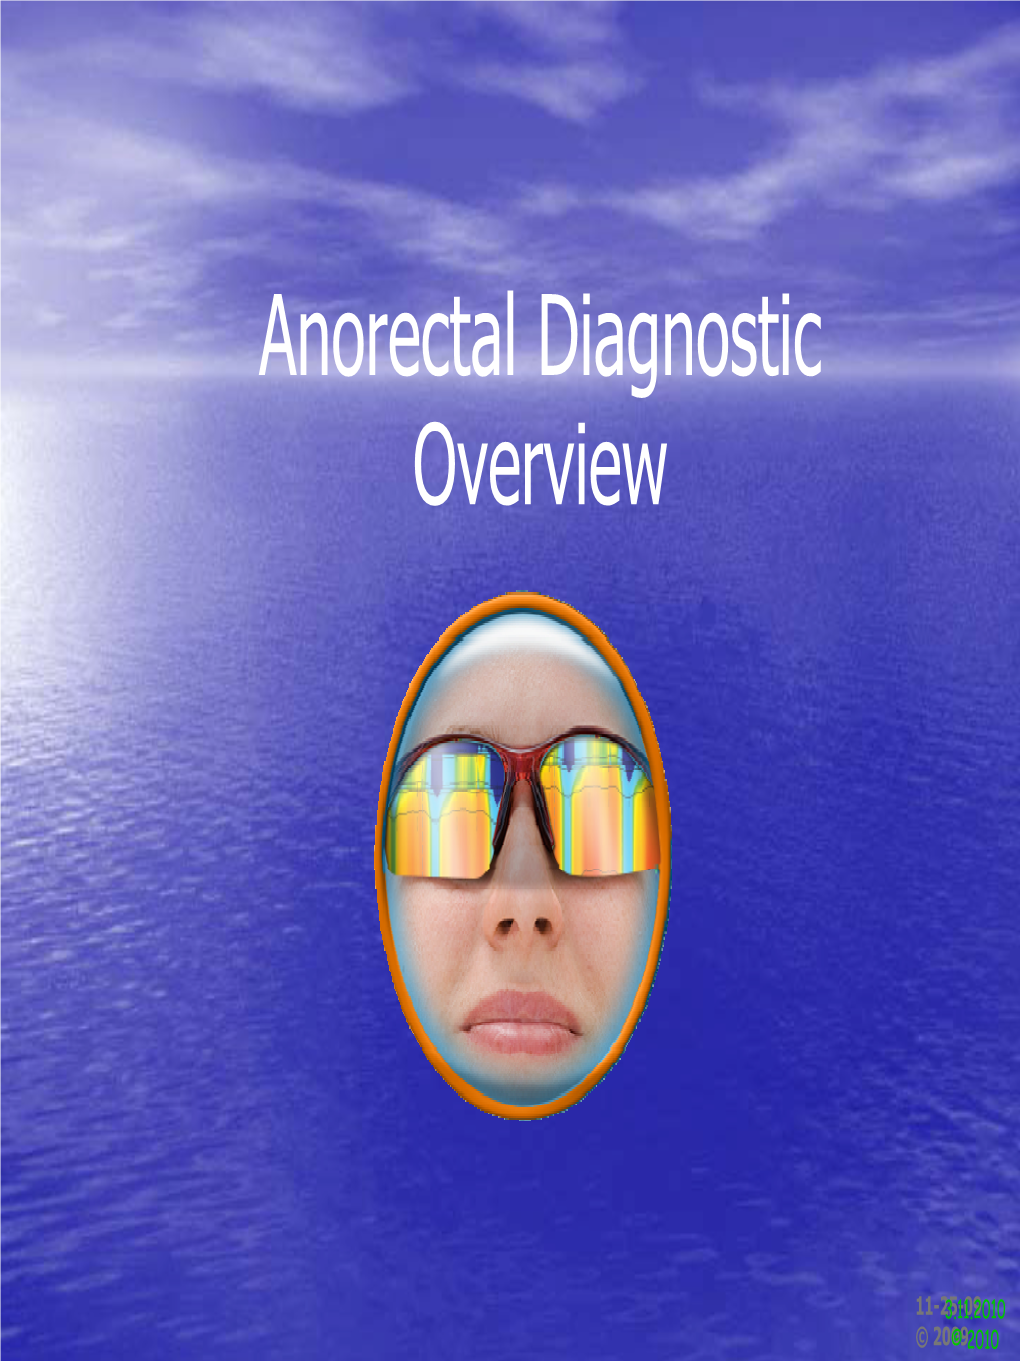 Anorectal Diagnostic Overview